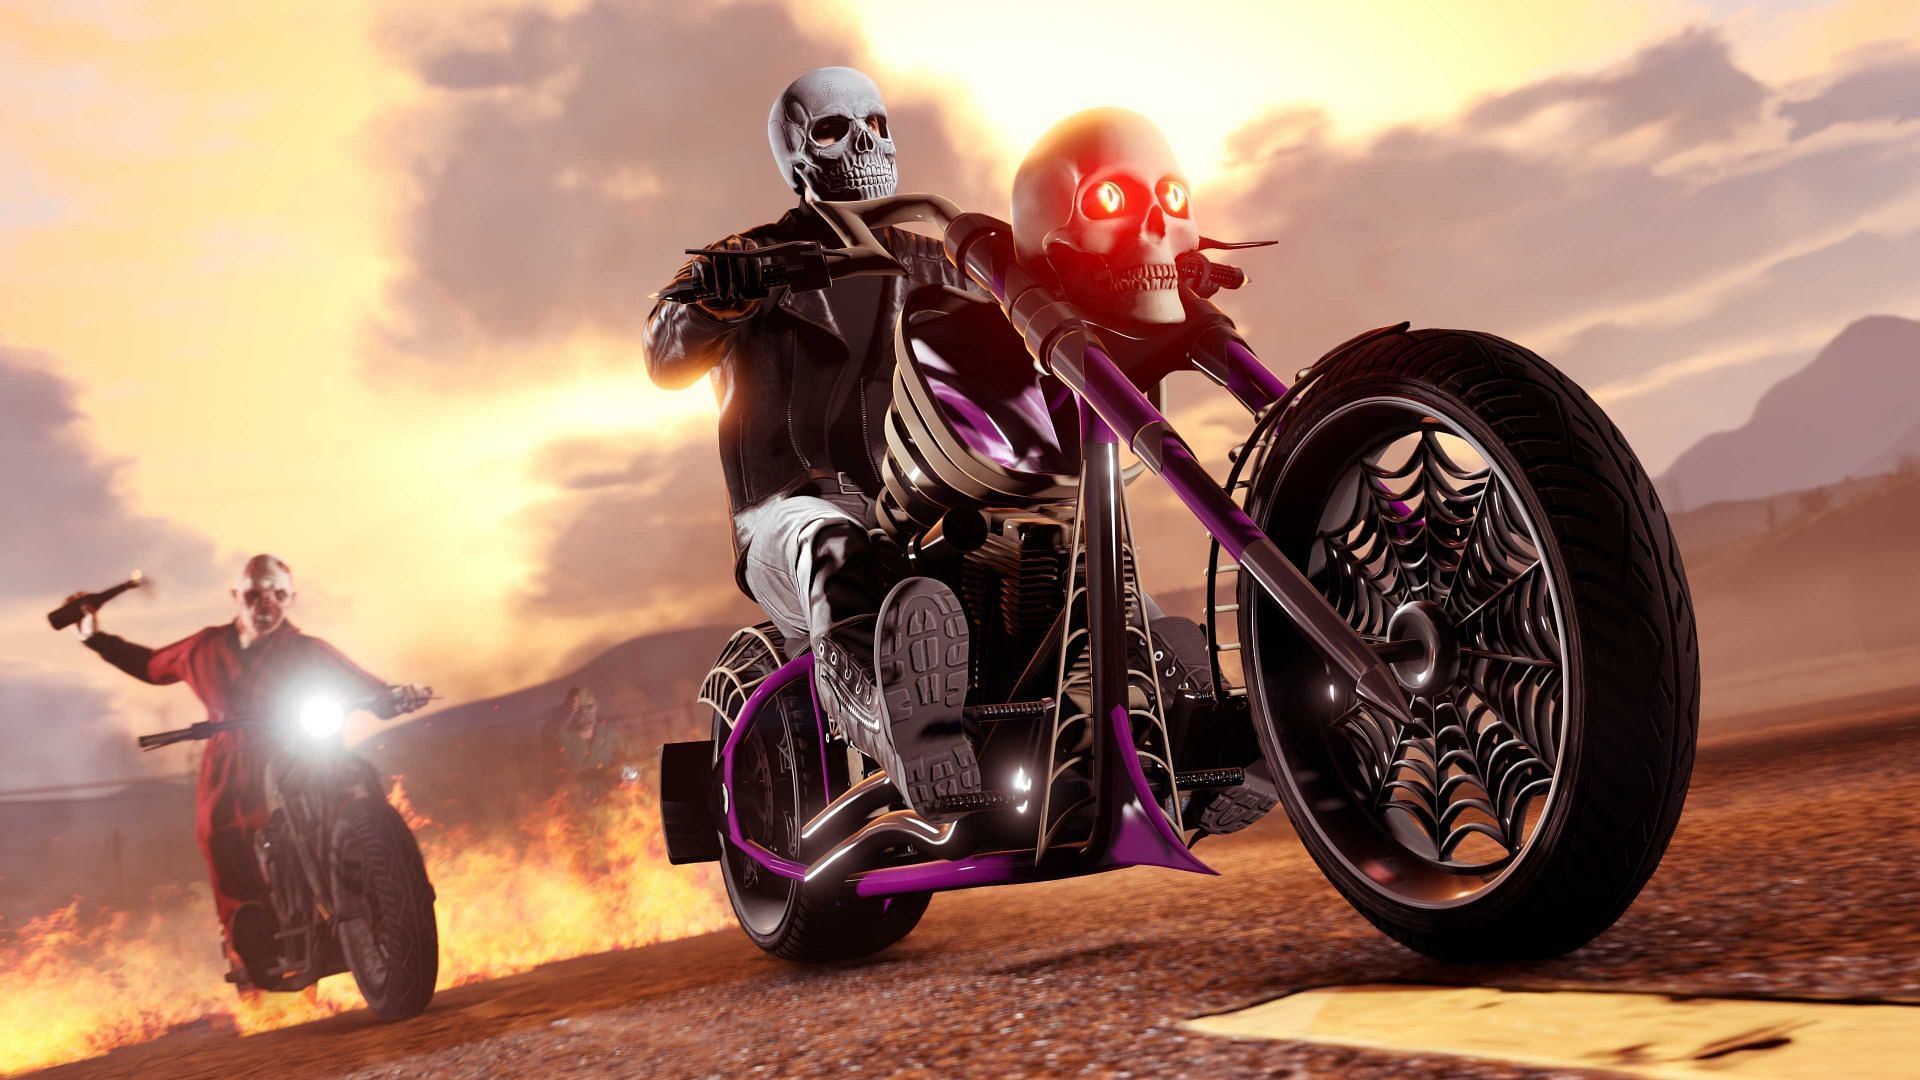 The Sanctus is in the front (Image via Rockstar Games)